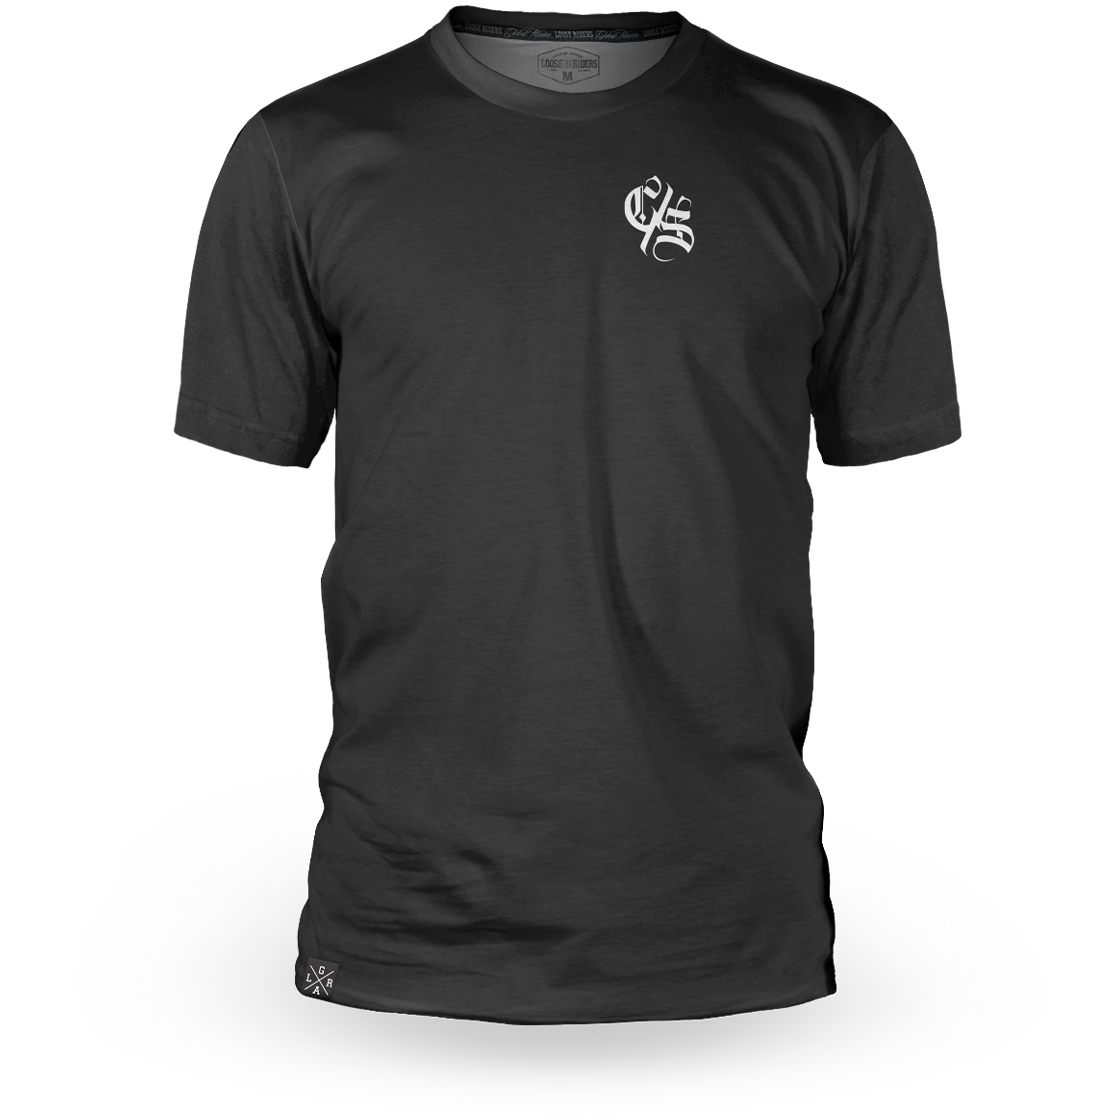 Image of Loose Riders Technical Short Sleeve Jersey - The Cult of Shred